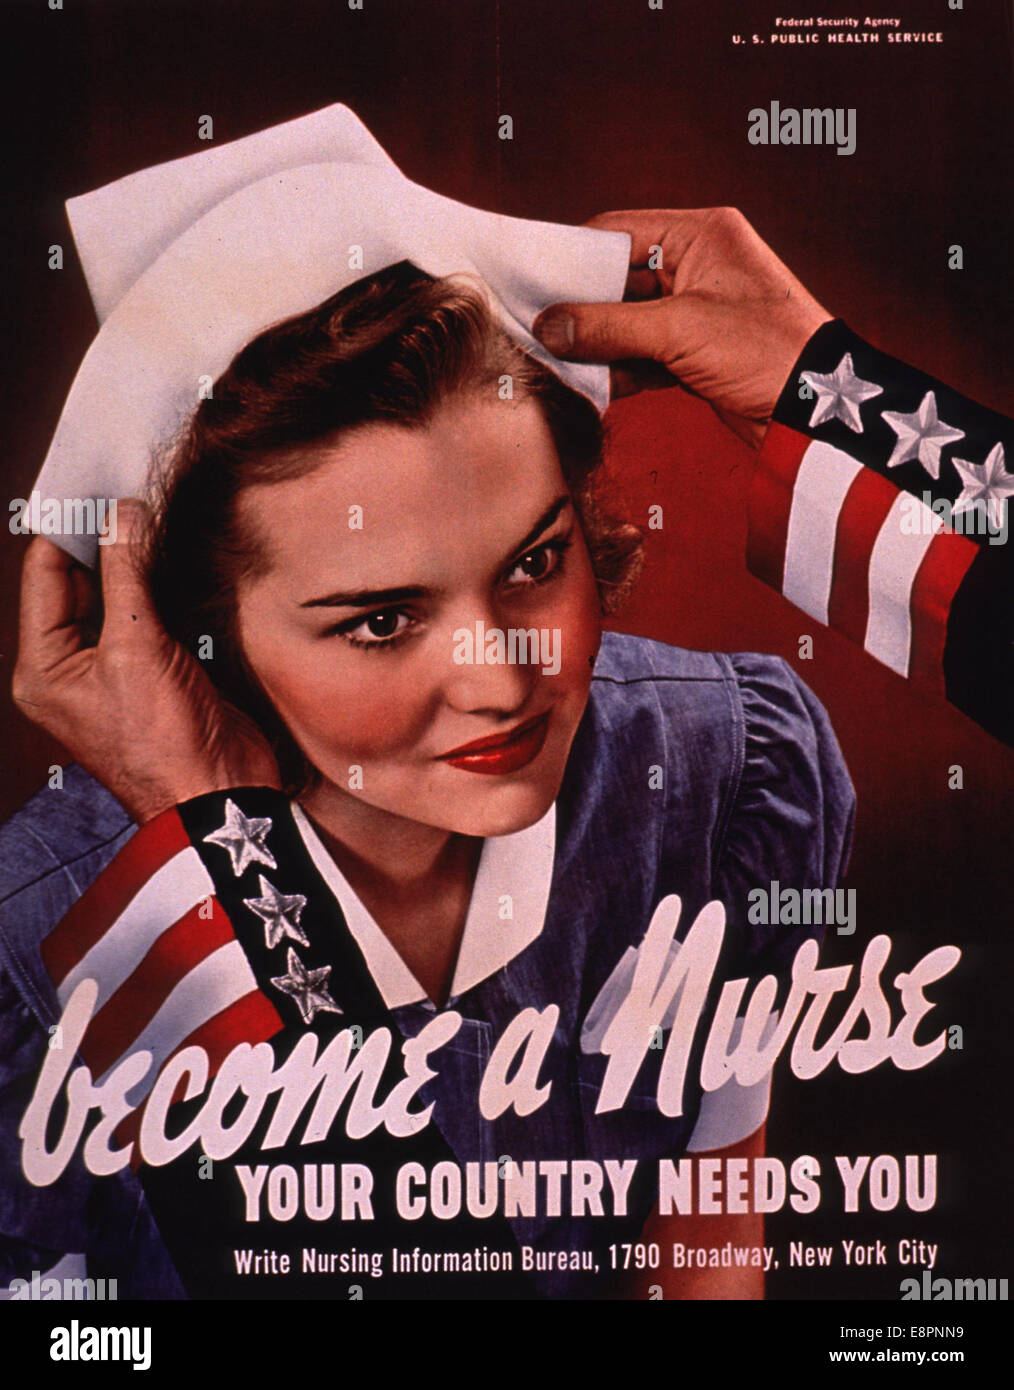 Become a nurse, your country needs you Stock Photo